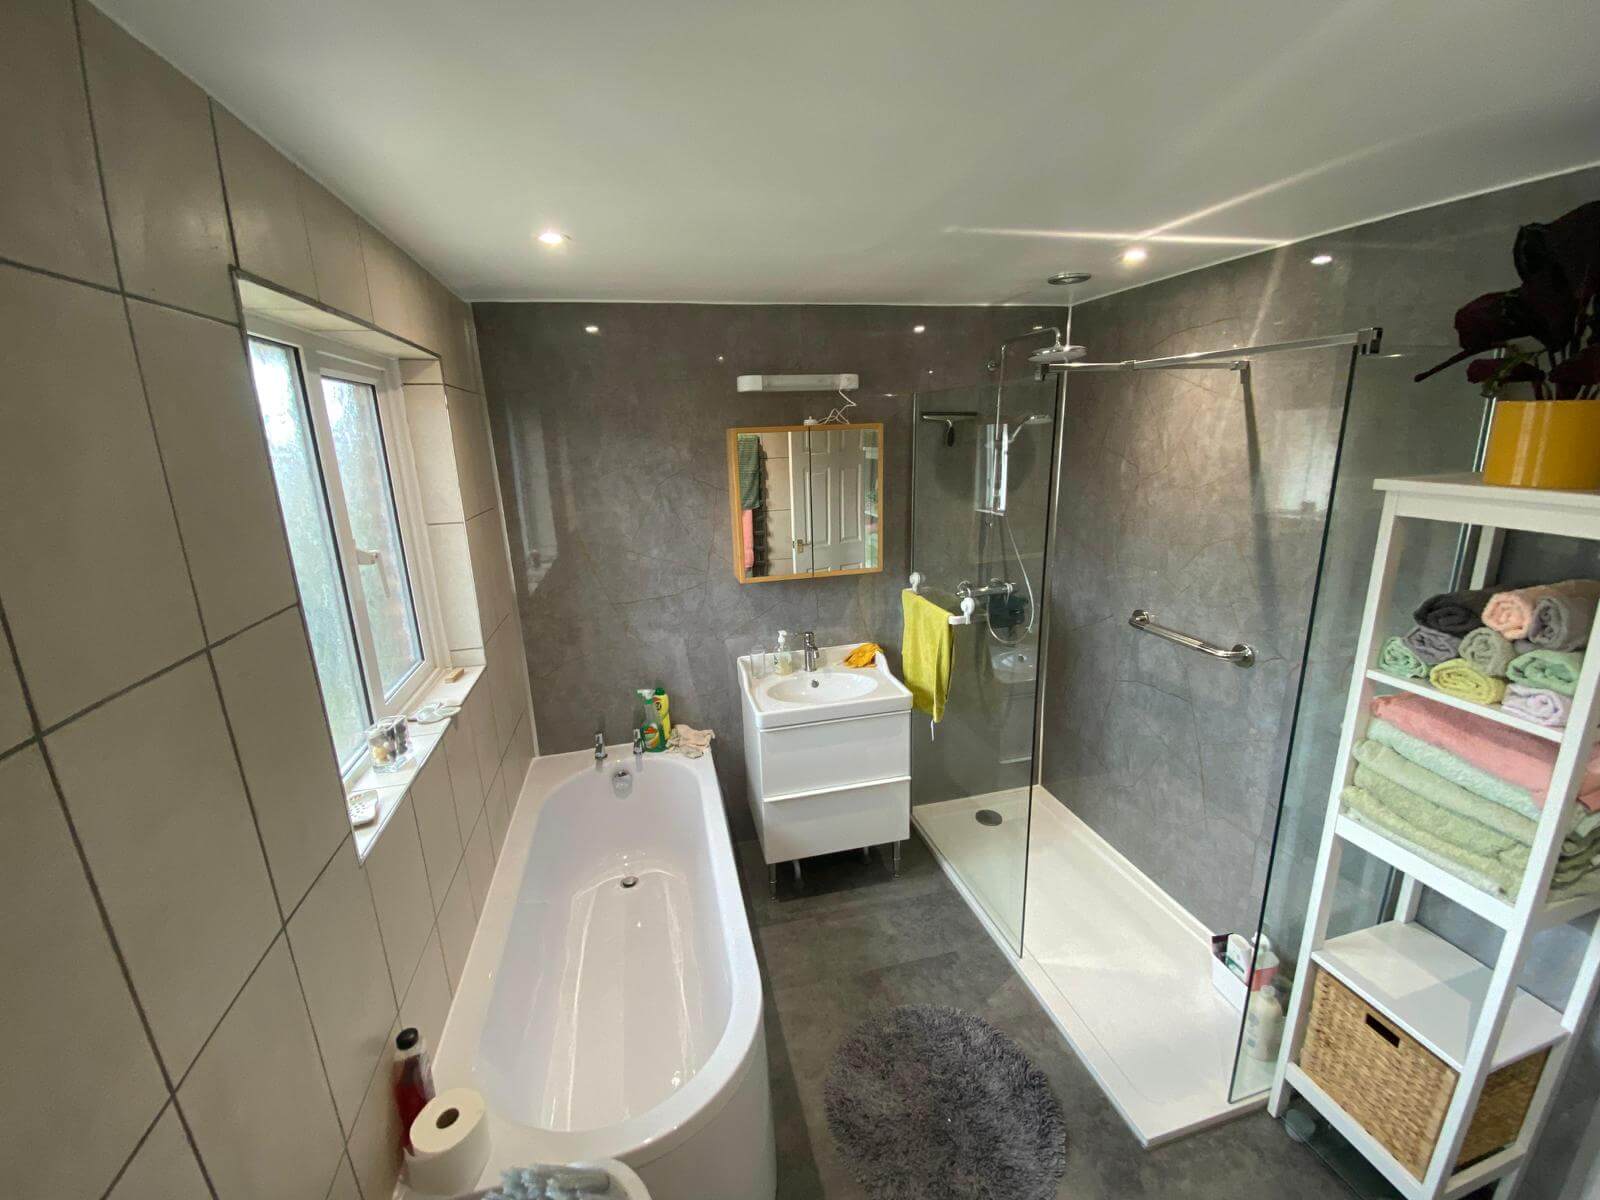 A Total Transformation: Complete Bathroom Extension and Refit in Devon